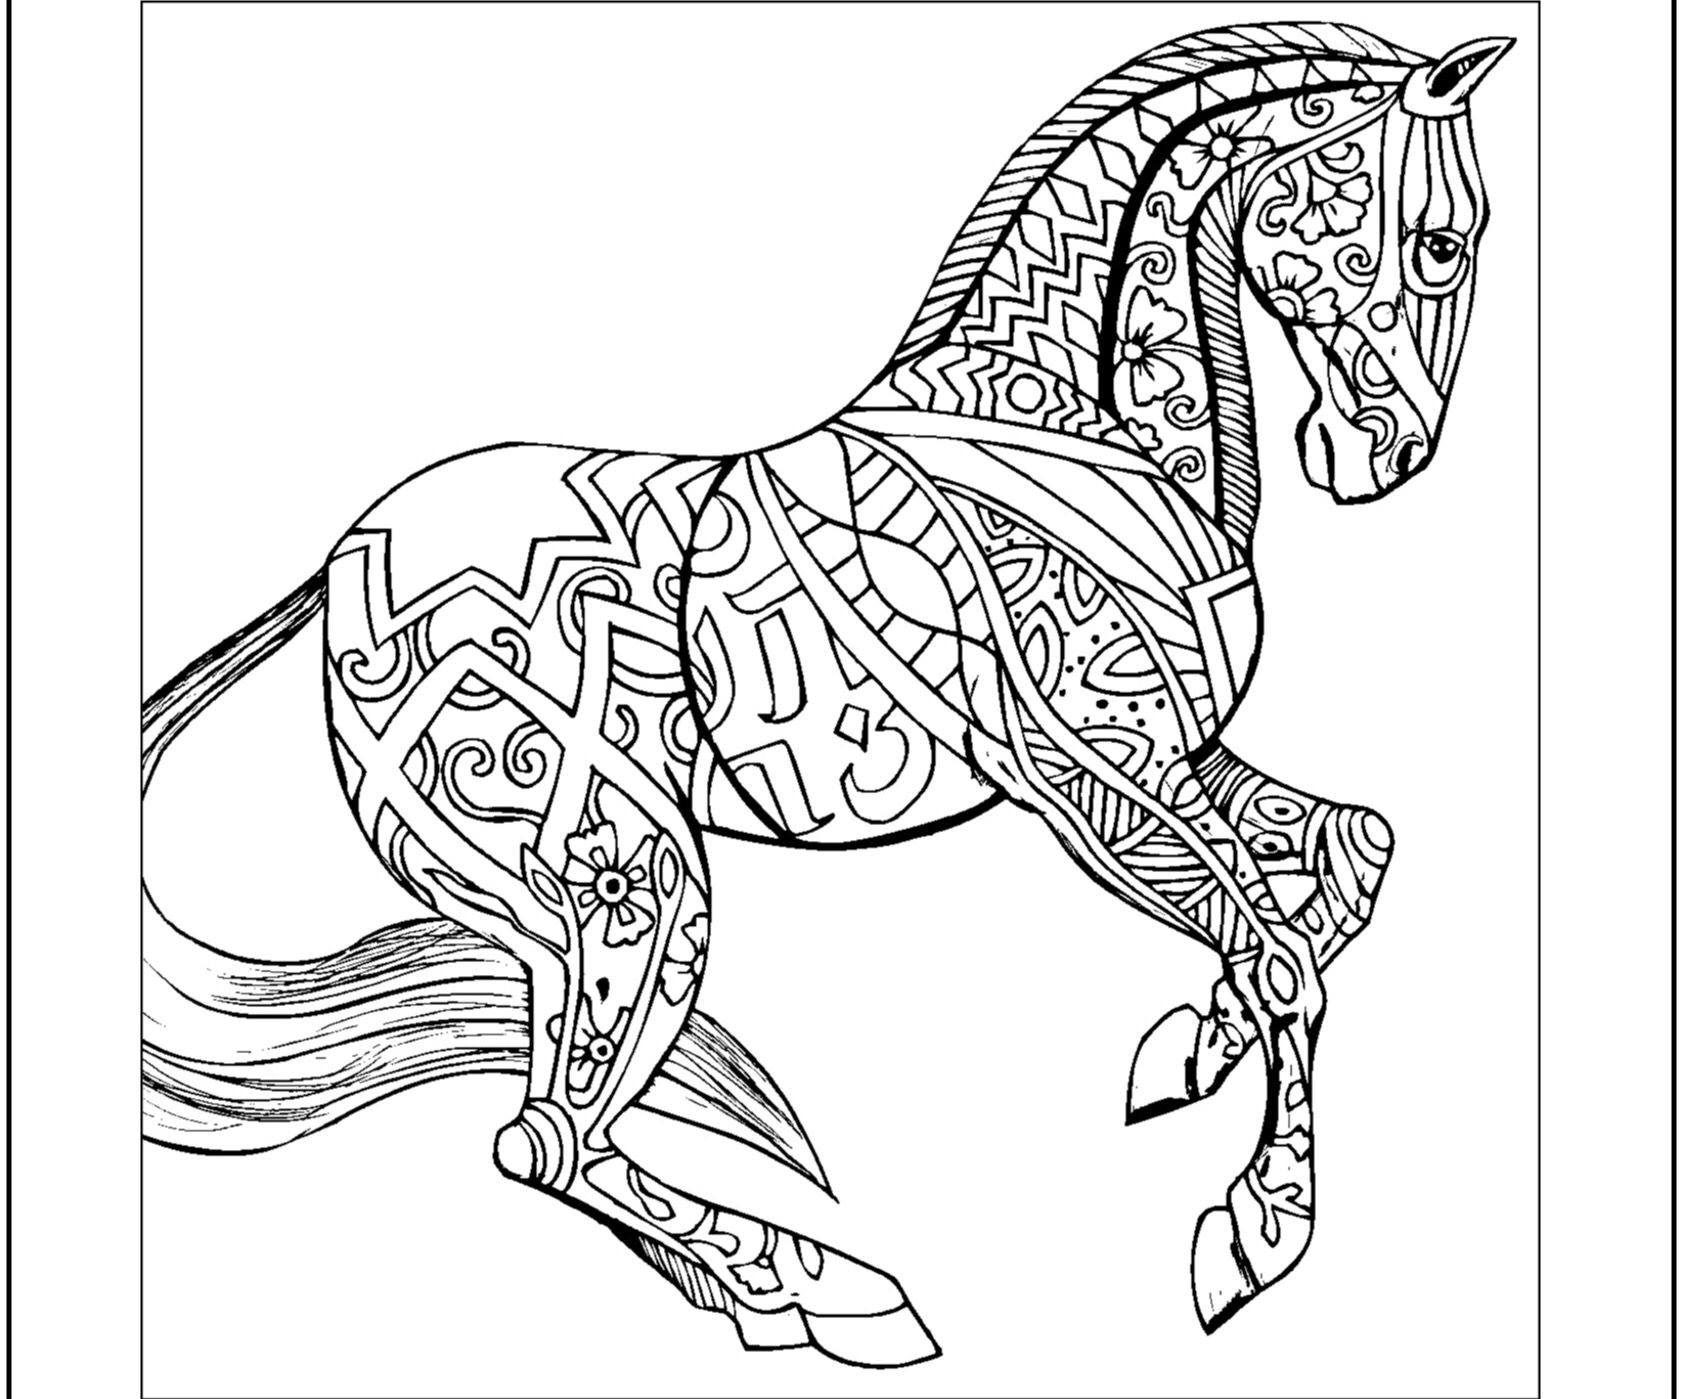 hard-animal-coloring-pages-free-download-gambr-co